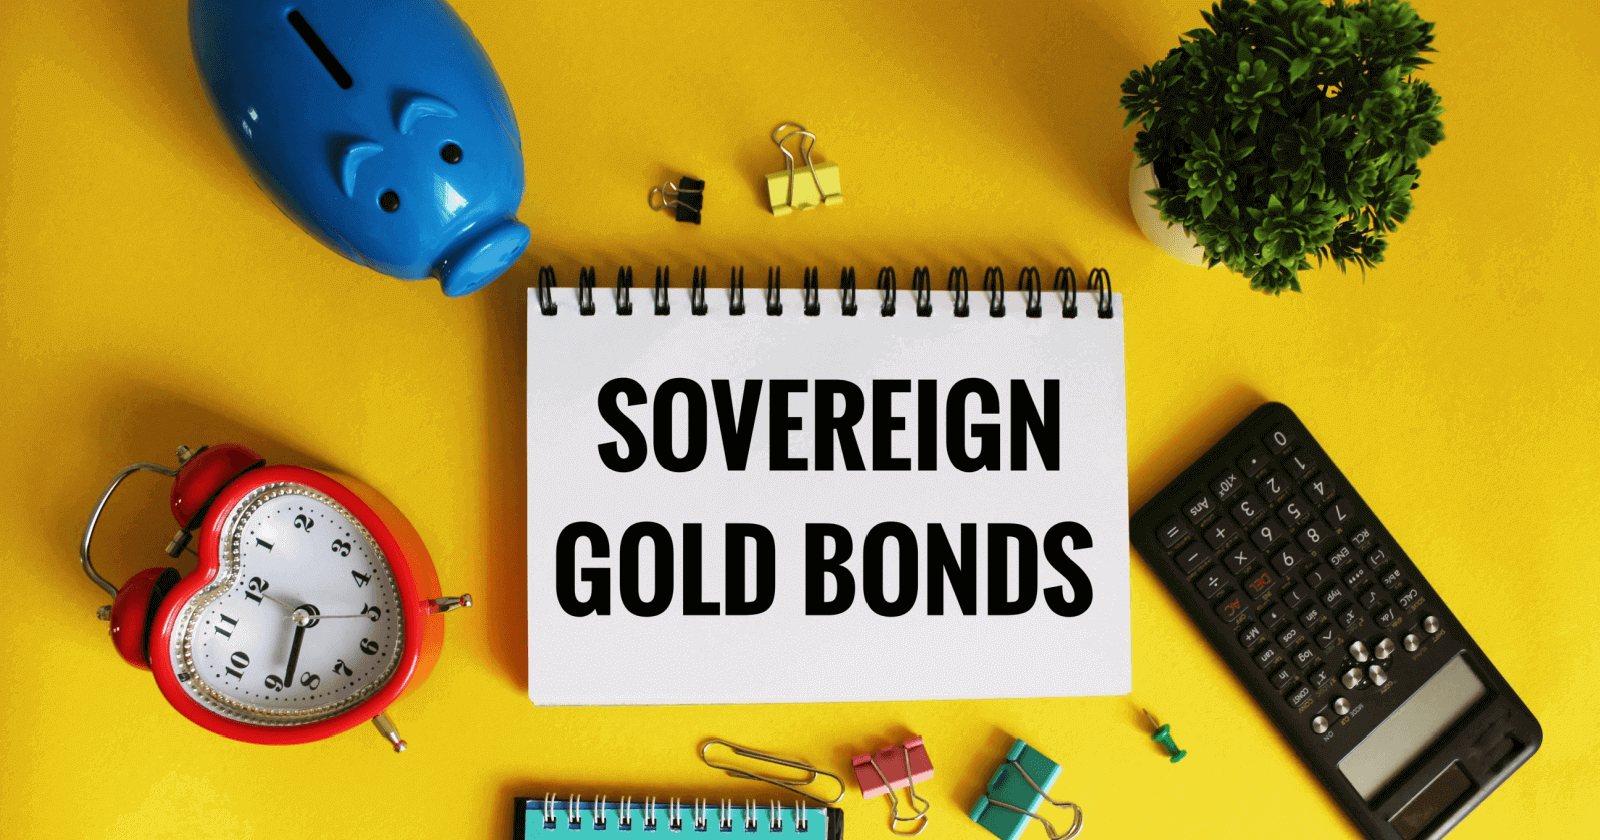 Sovereign Gold Bond Scheme (SGB): Benefits, Eligibility, and Investment Options